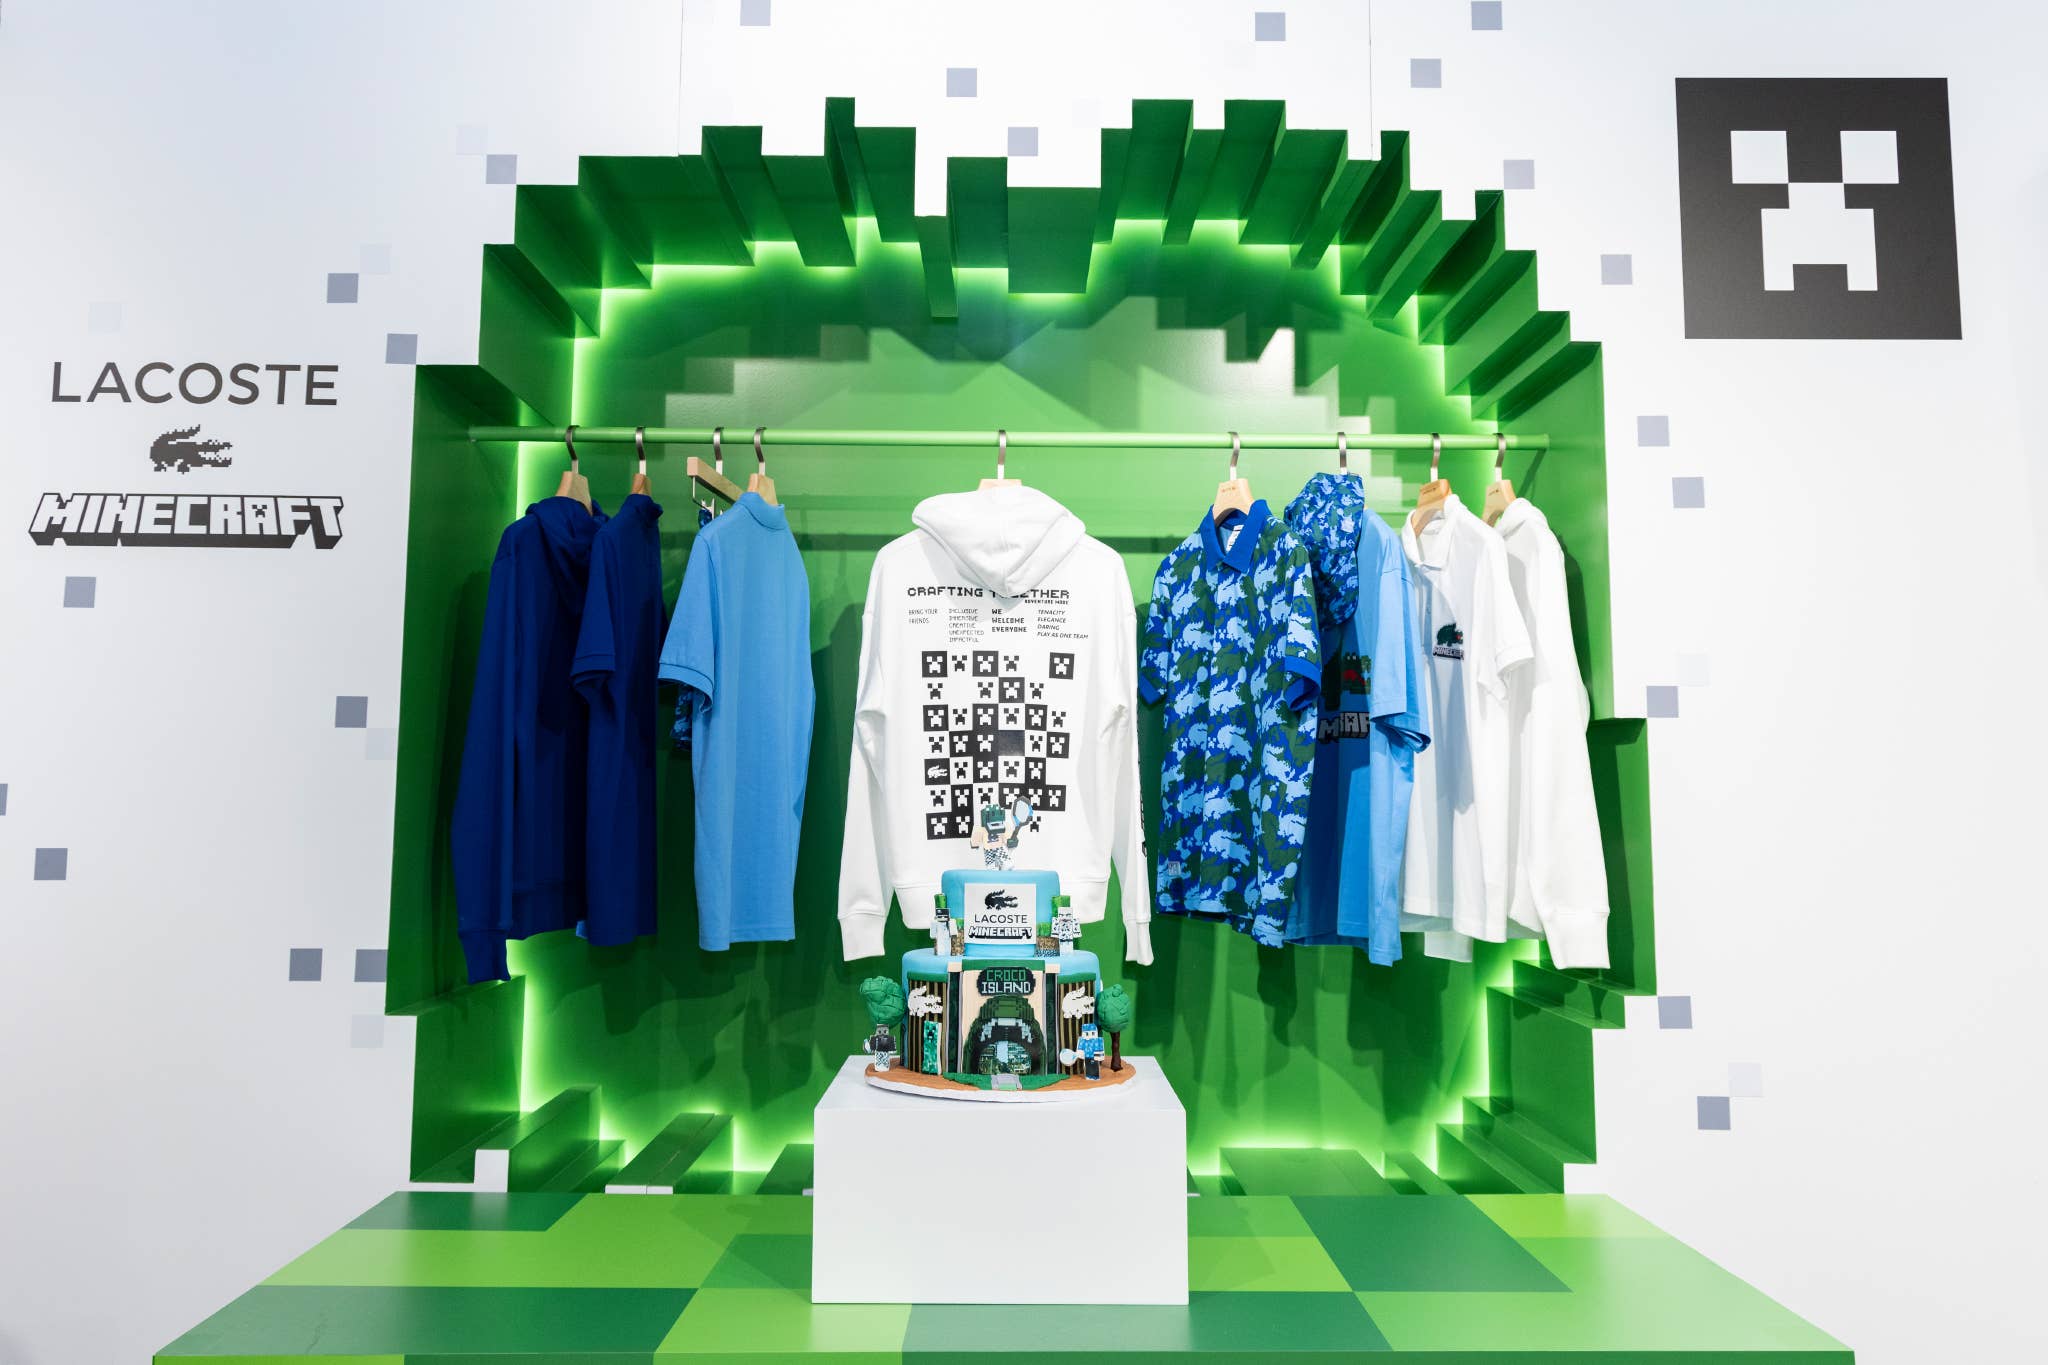 Lacoste Celebrates Its Minecraft Collab With an Immersive NYC Experience | Complex